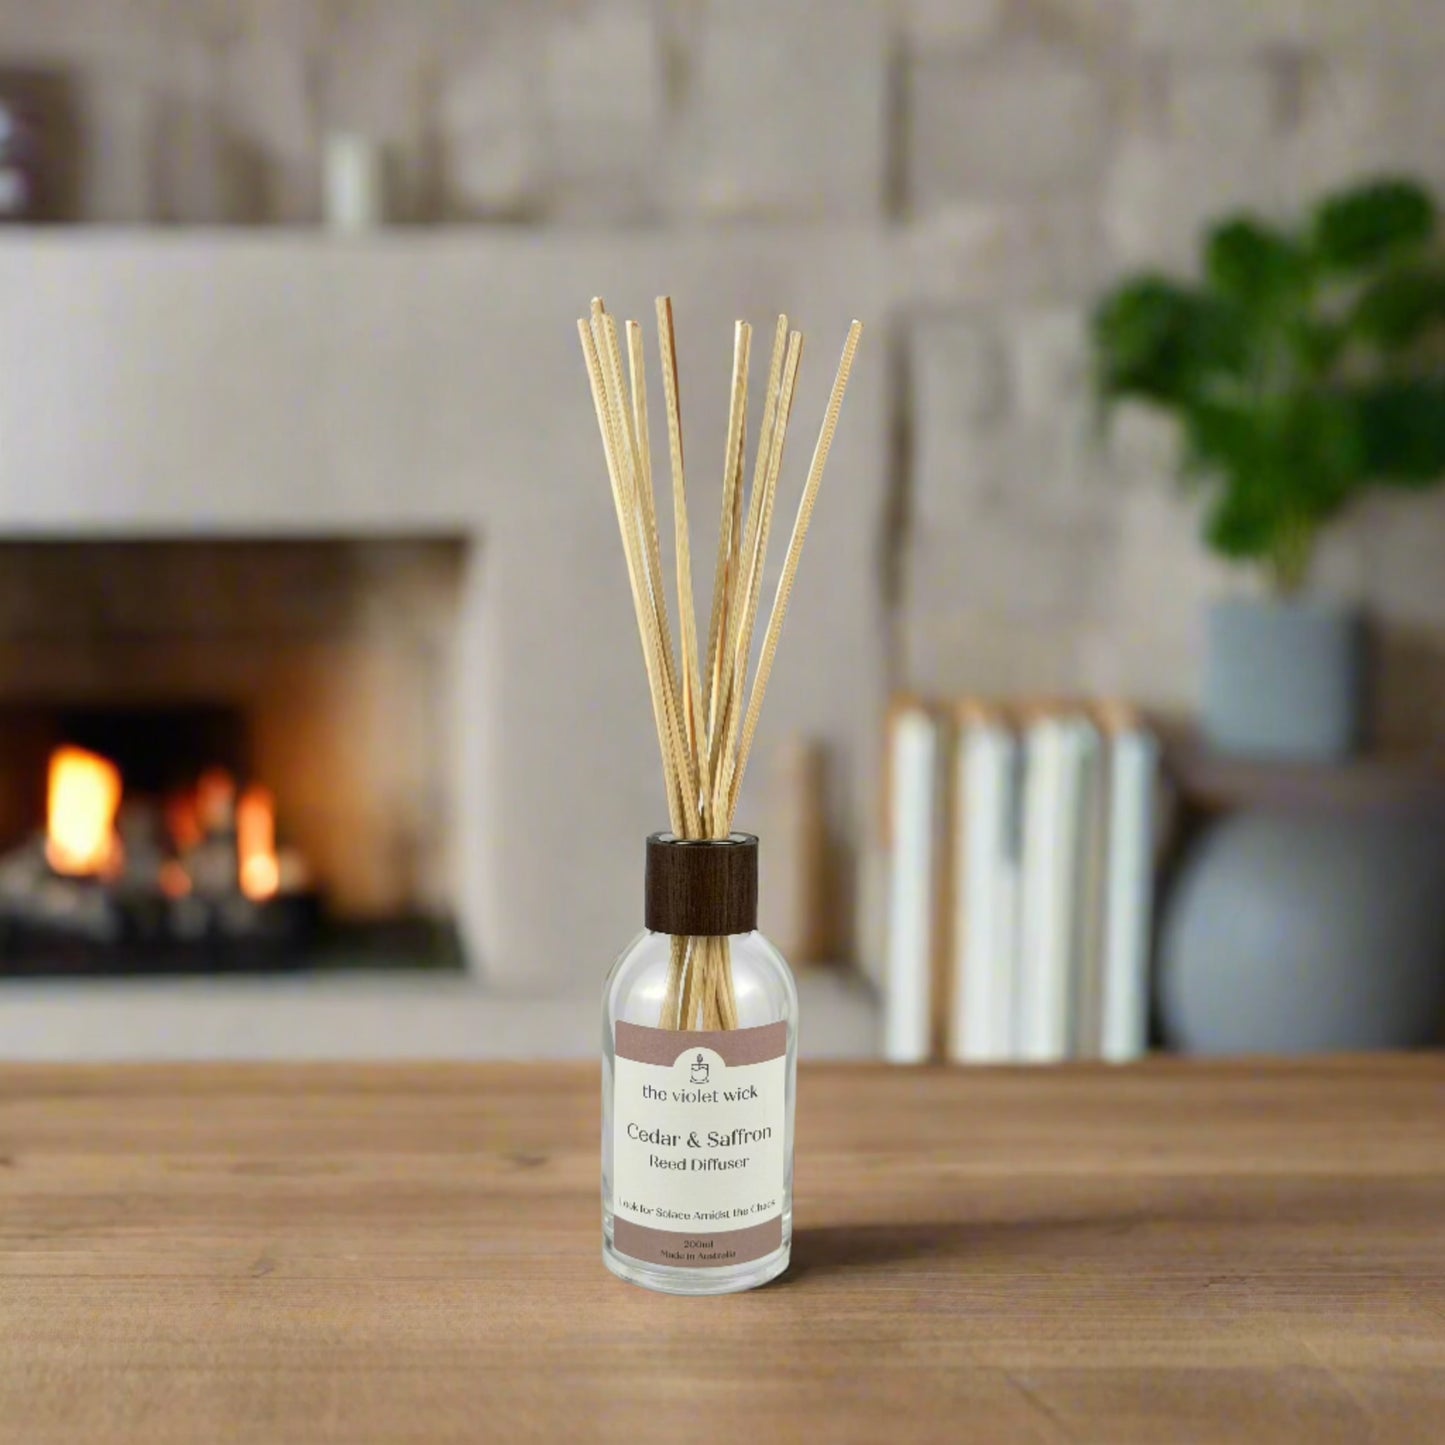 Cedar and Saffron reed diffuser from The Violet Wick